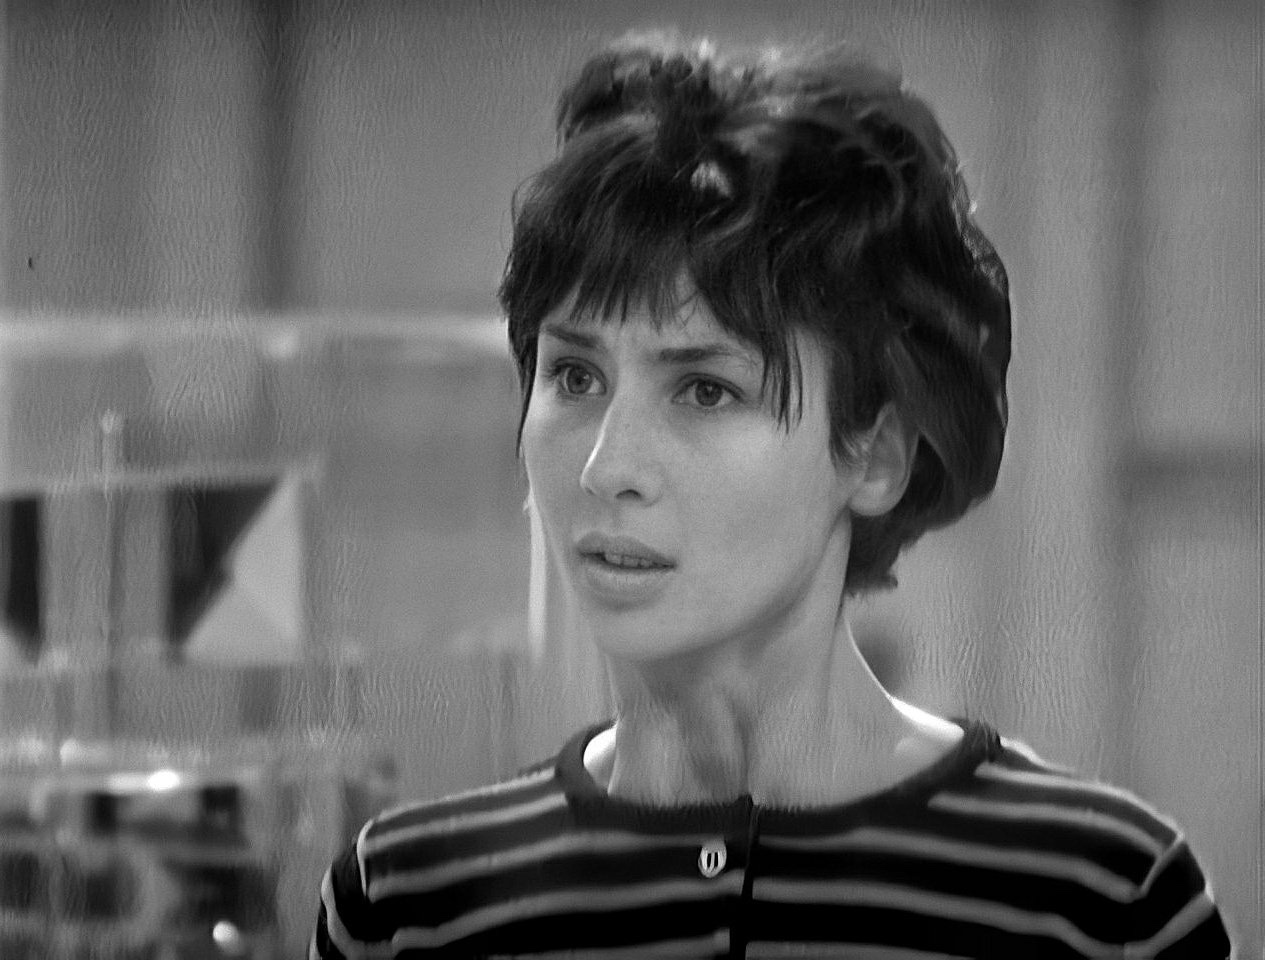 Doctor Who - An Unearthly Child 4K Upscale via Pip Madeley. Doctor Who copyright BBC